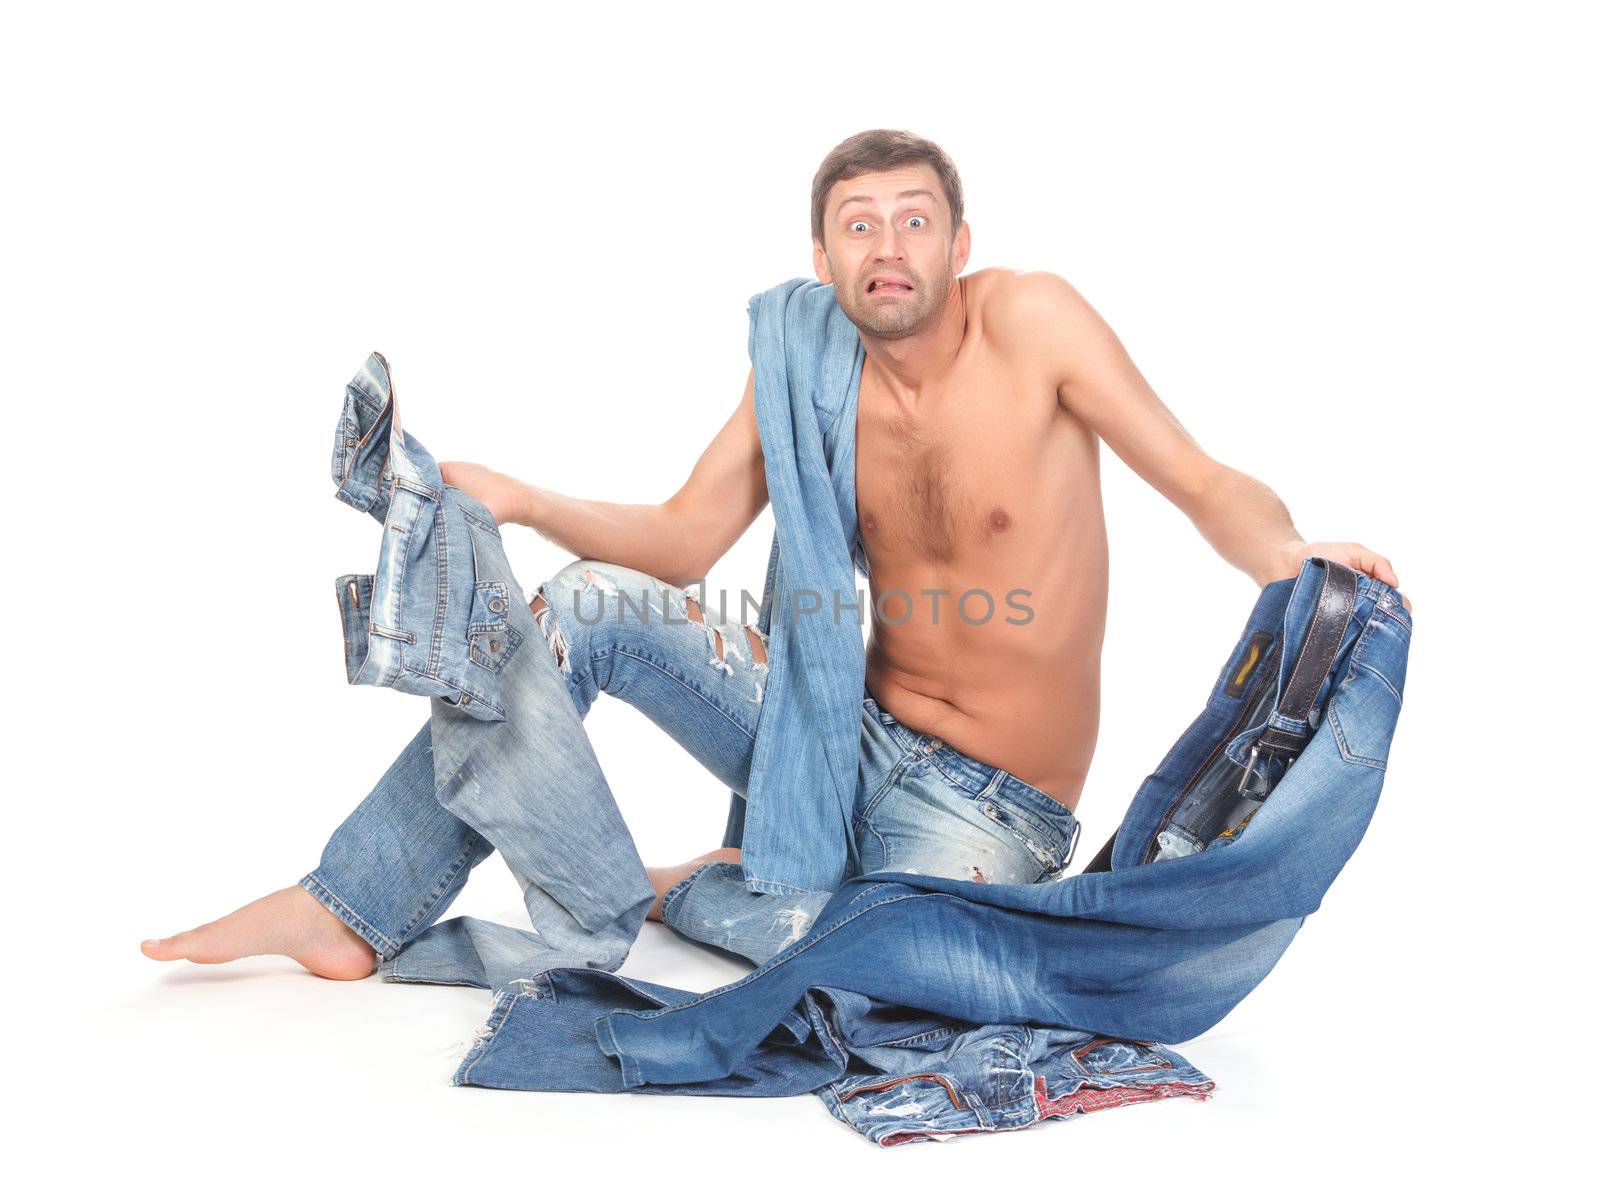 Attractive Indecisive man trying to dress sitting shirtless and barefoot on the floor holding several pairs of denim jeans shrugging his shoulders with a look of consternation